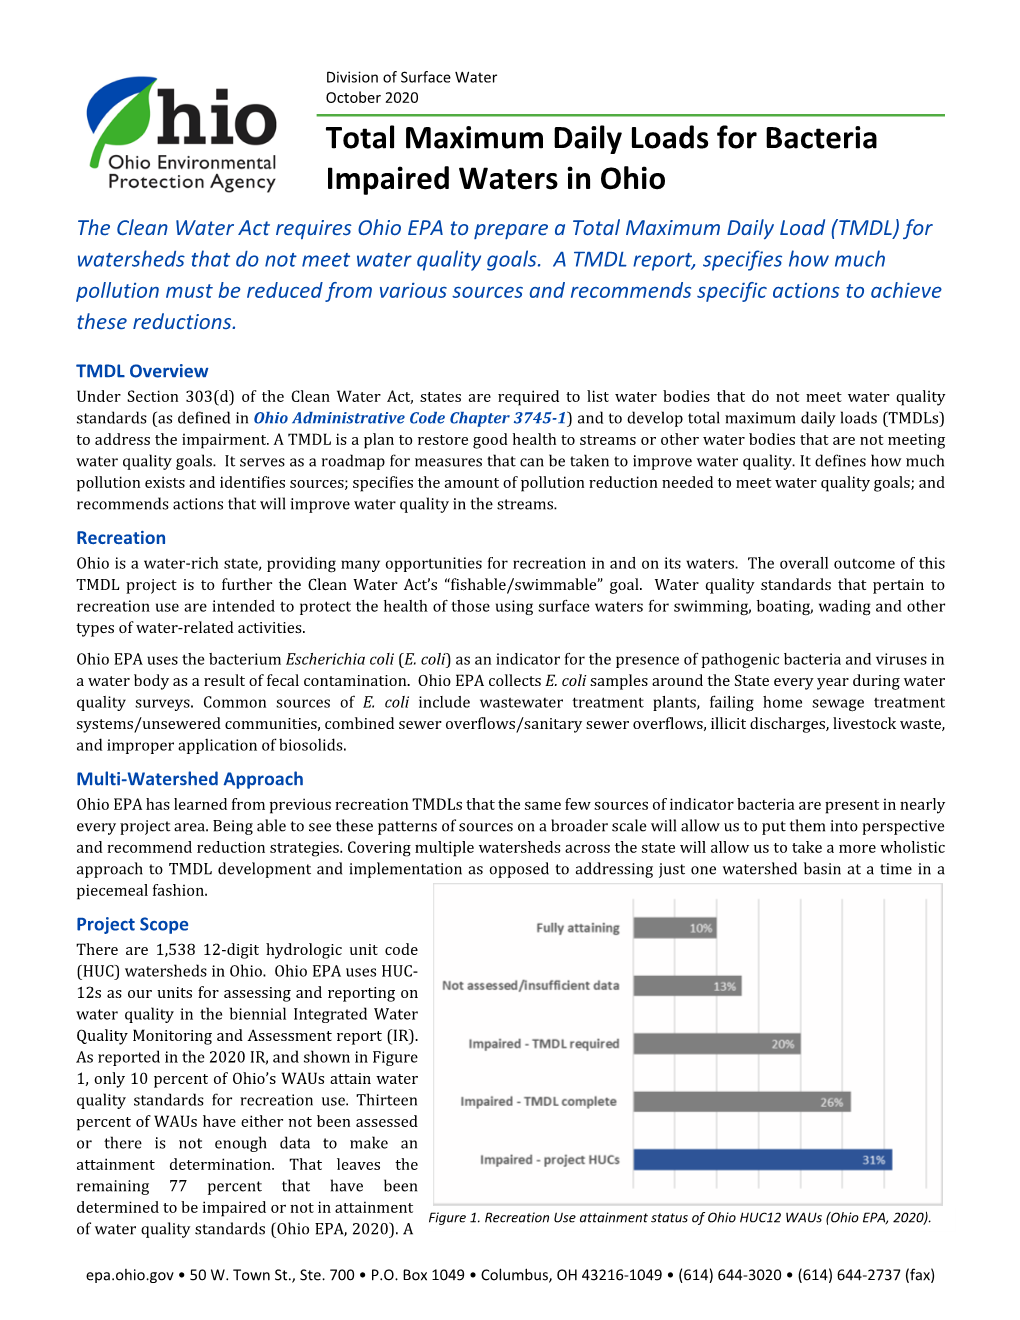 Total Maximum Daily Loads for Bacteria Impaired Waters in Ohio